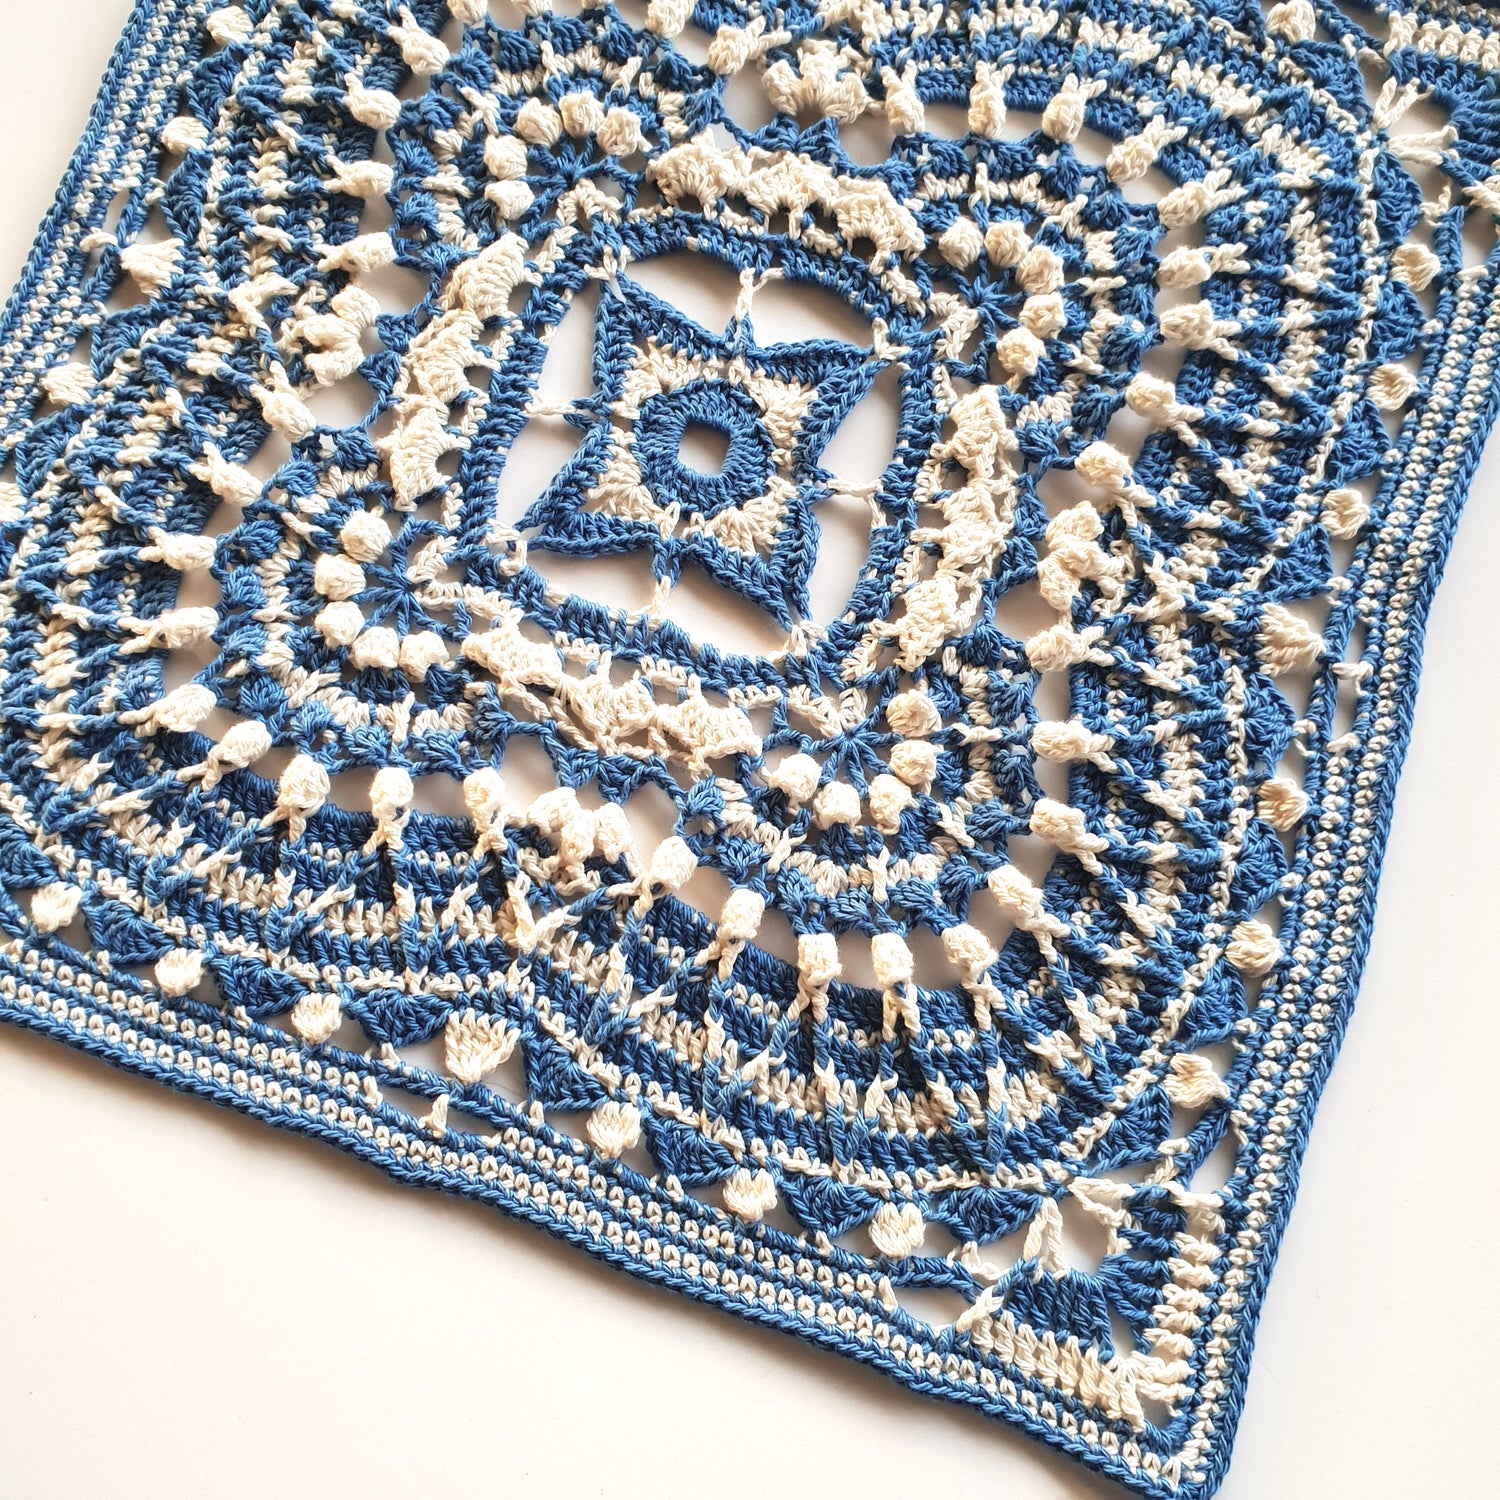 Giantess Blanket Pattern by Shelley Husband granny square in blue and cream